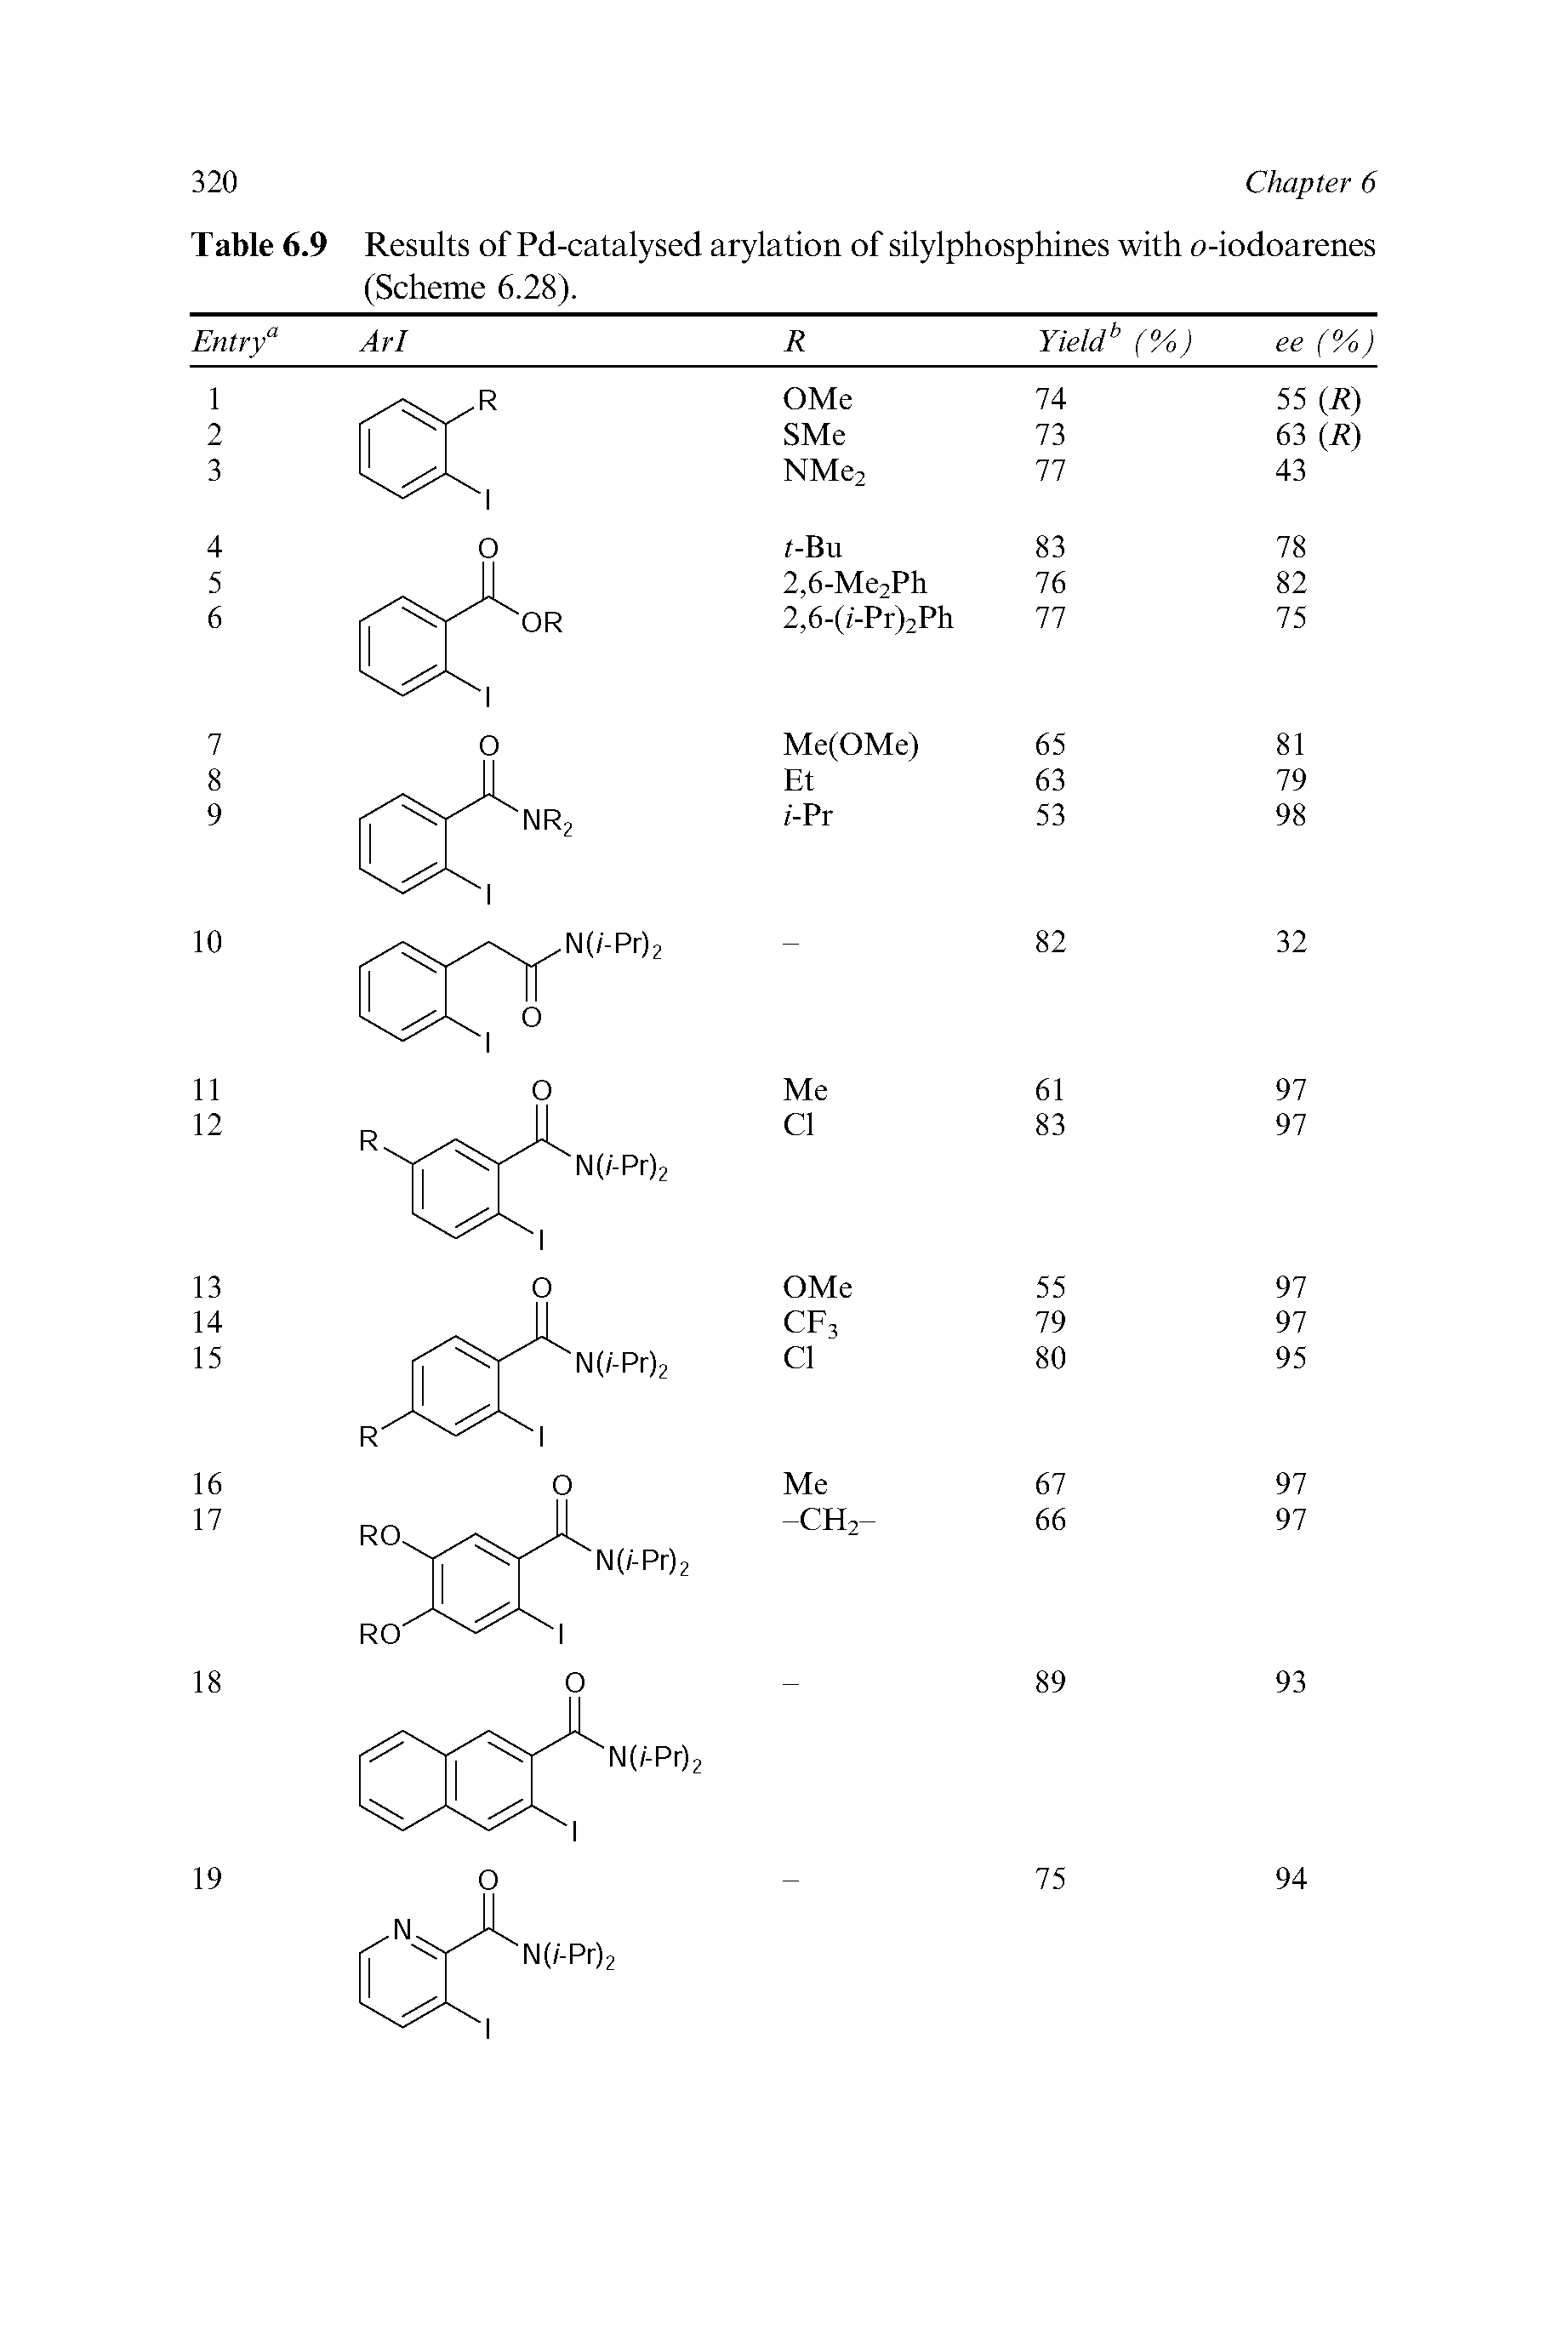 Table 6.9 Results of Pd-catalysed arylation of silylphosphines with o-iodoarenes (Scheme 6.28).